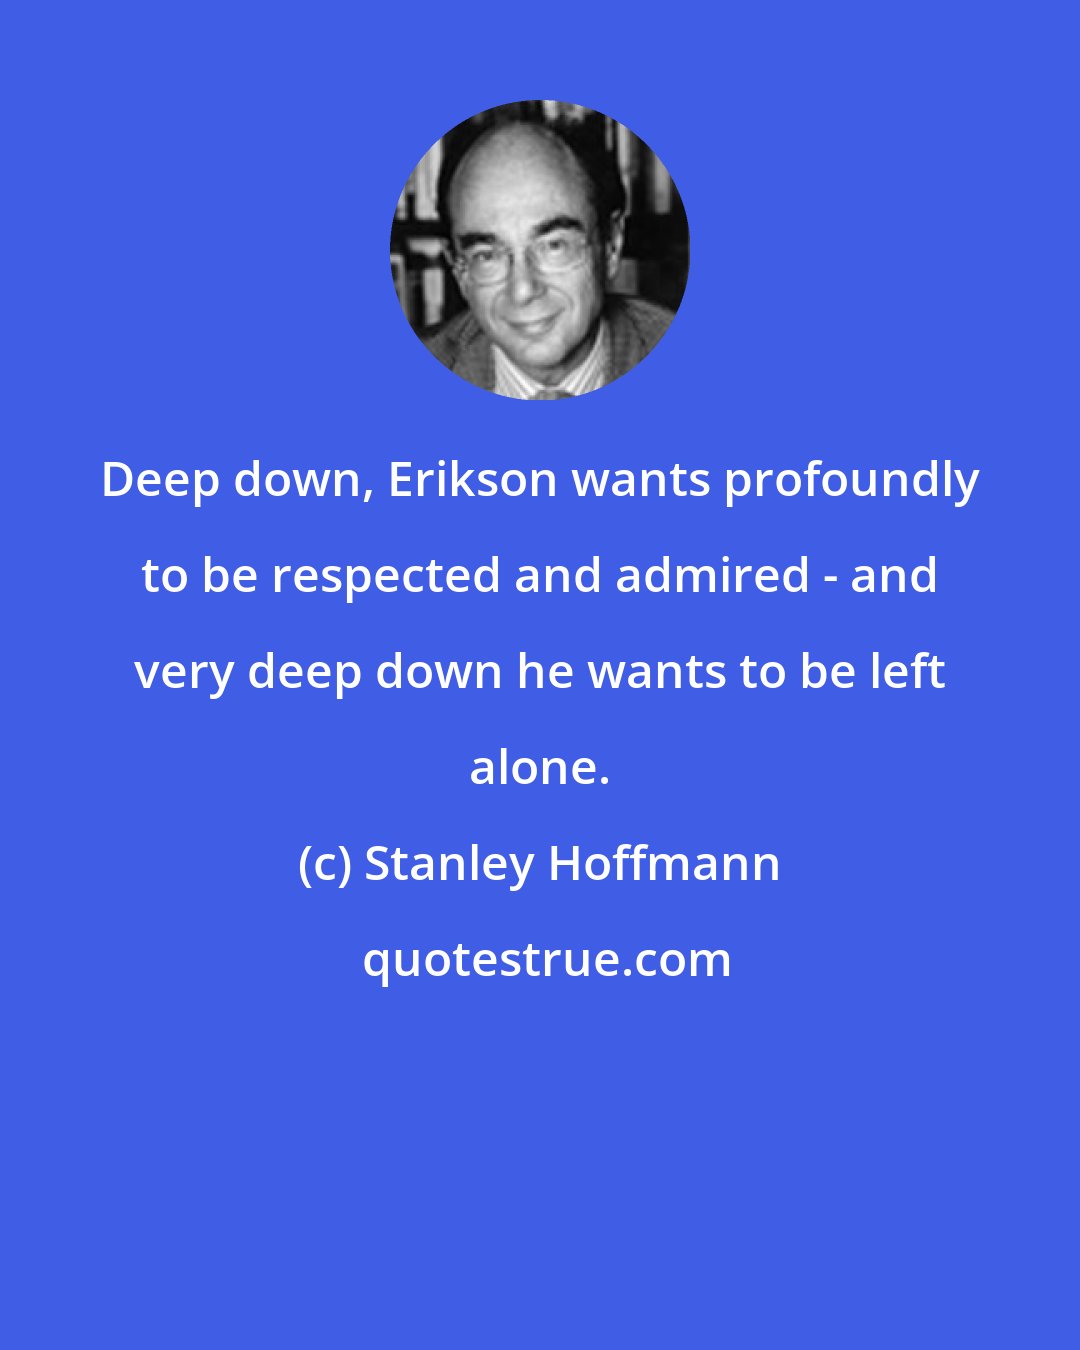 Stanley Hoffmann: Deep down, Erikson wants profoundly to be respected and admired - and very deep down he wants to be left alone.